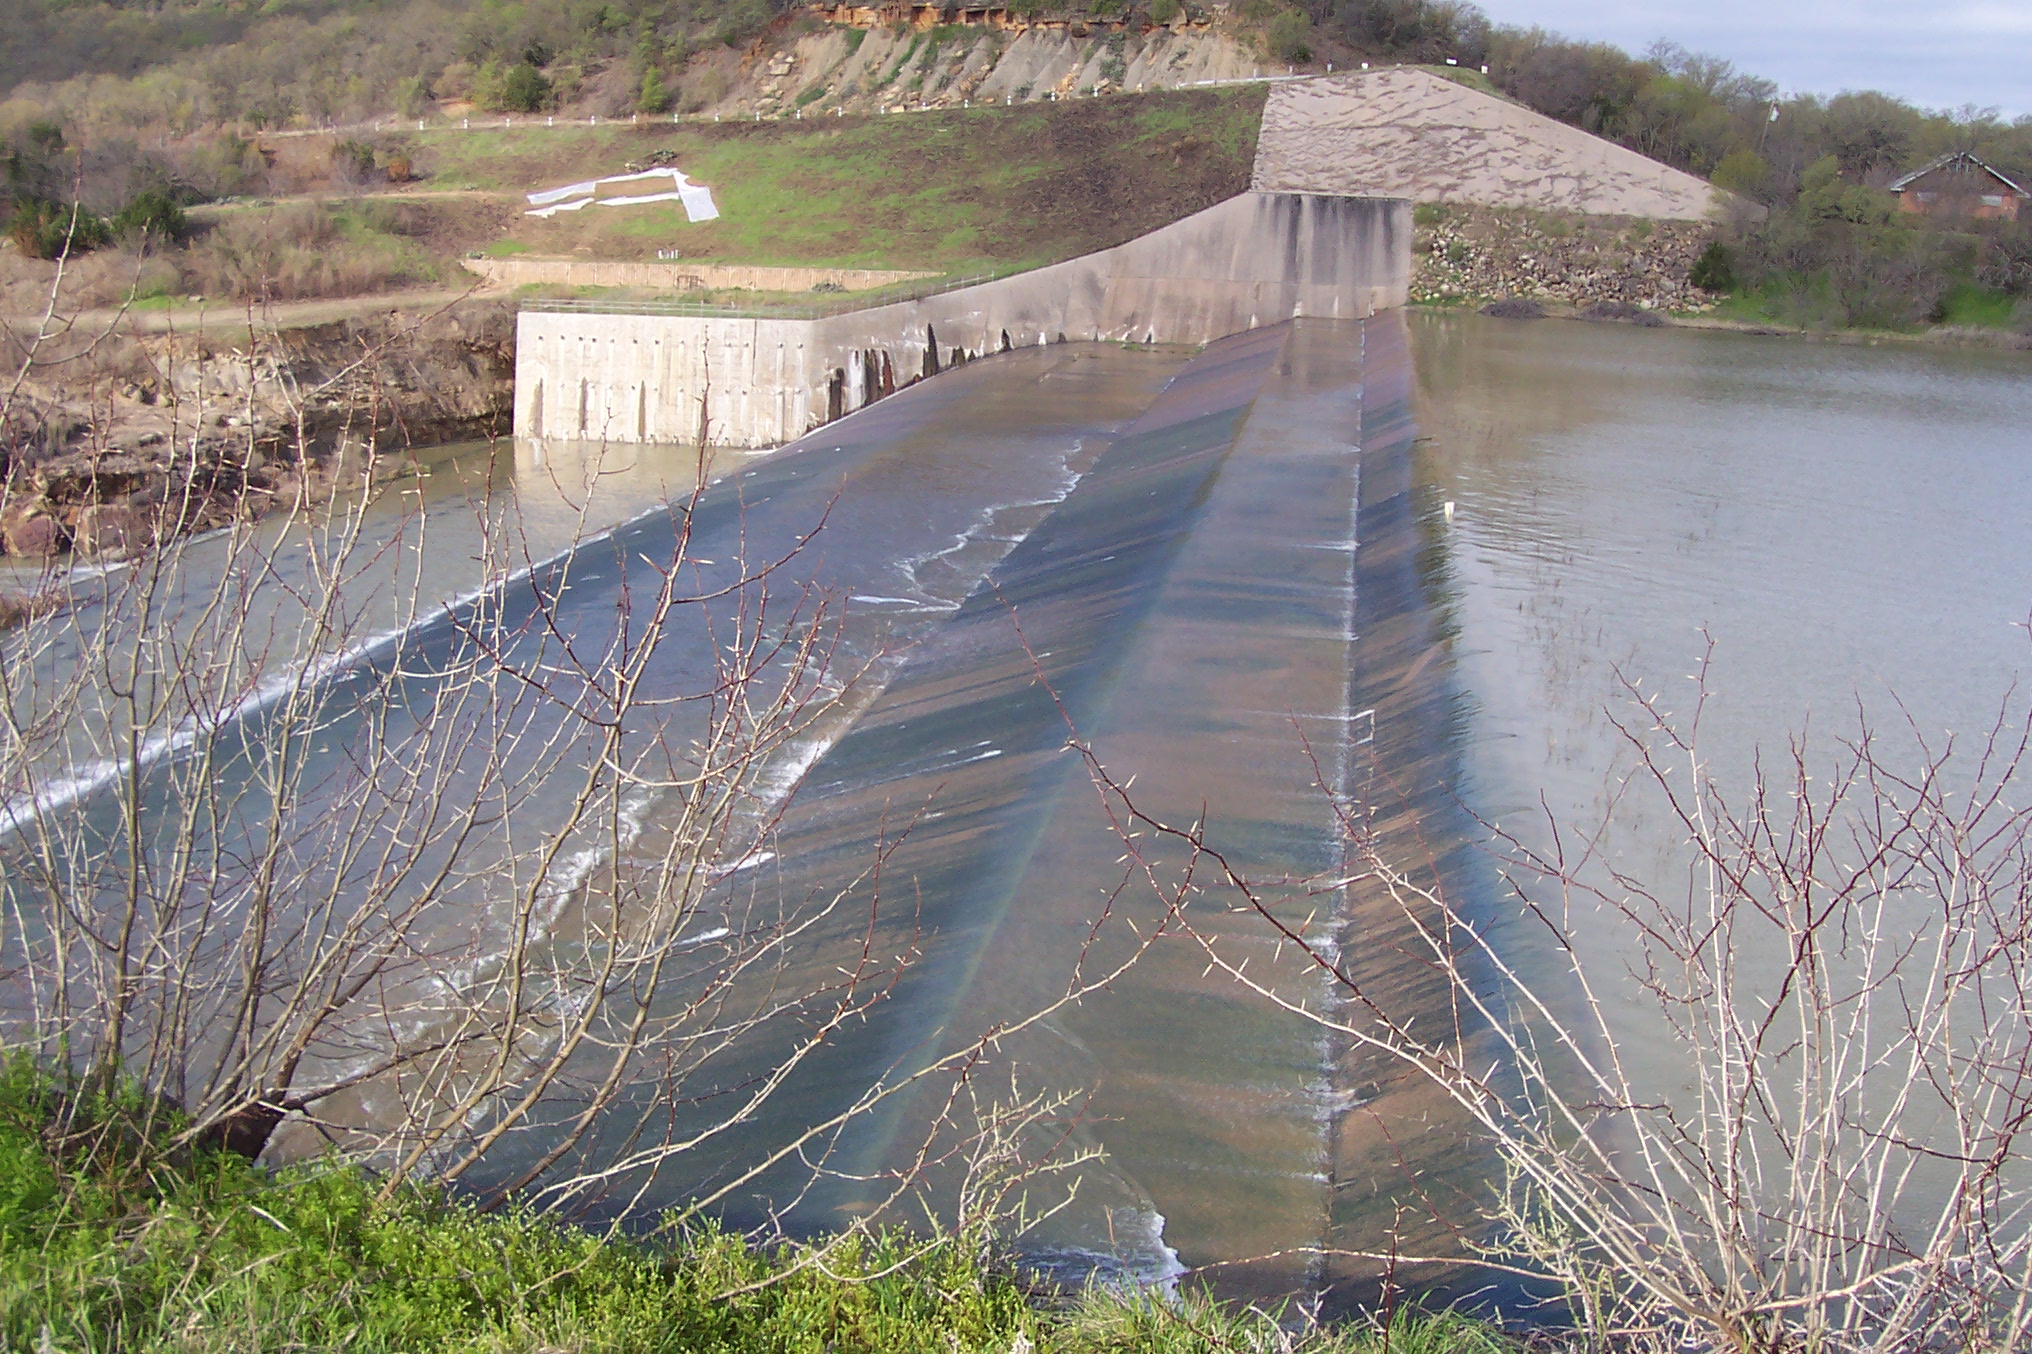 The Palo Pinto Spillway